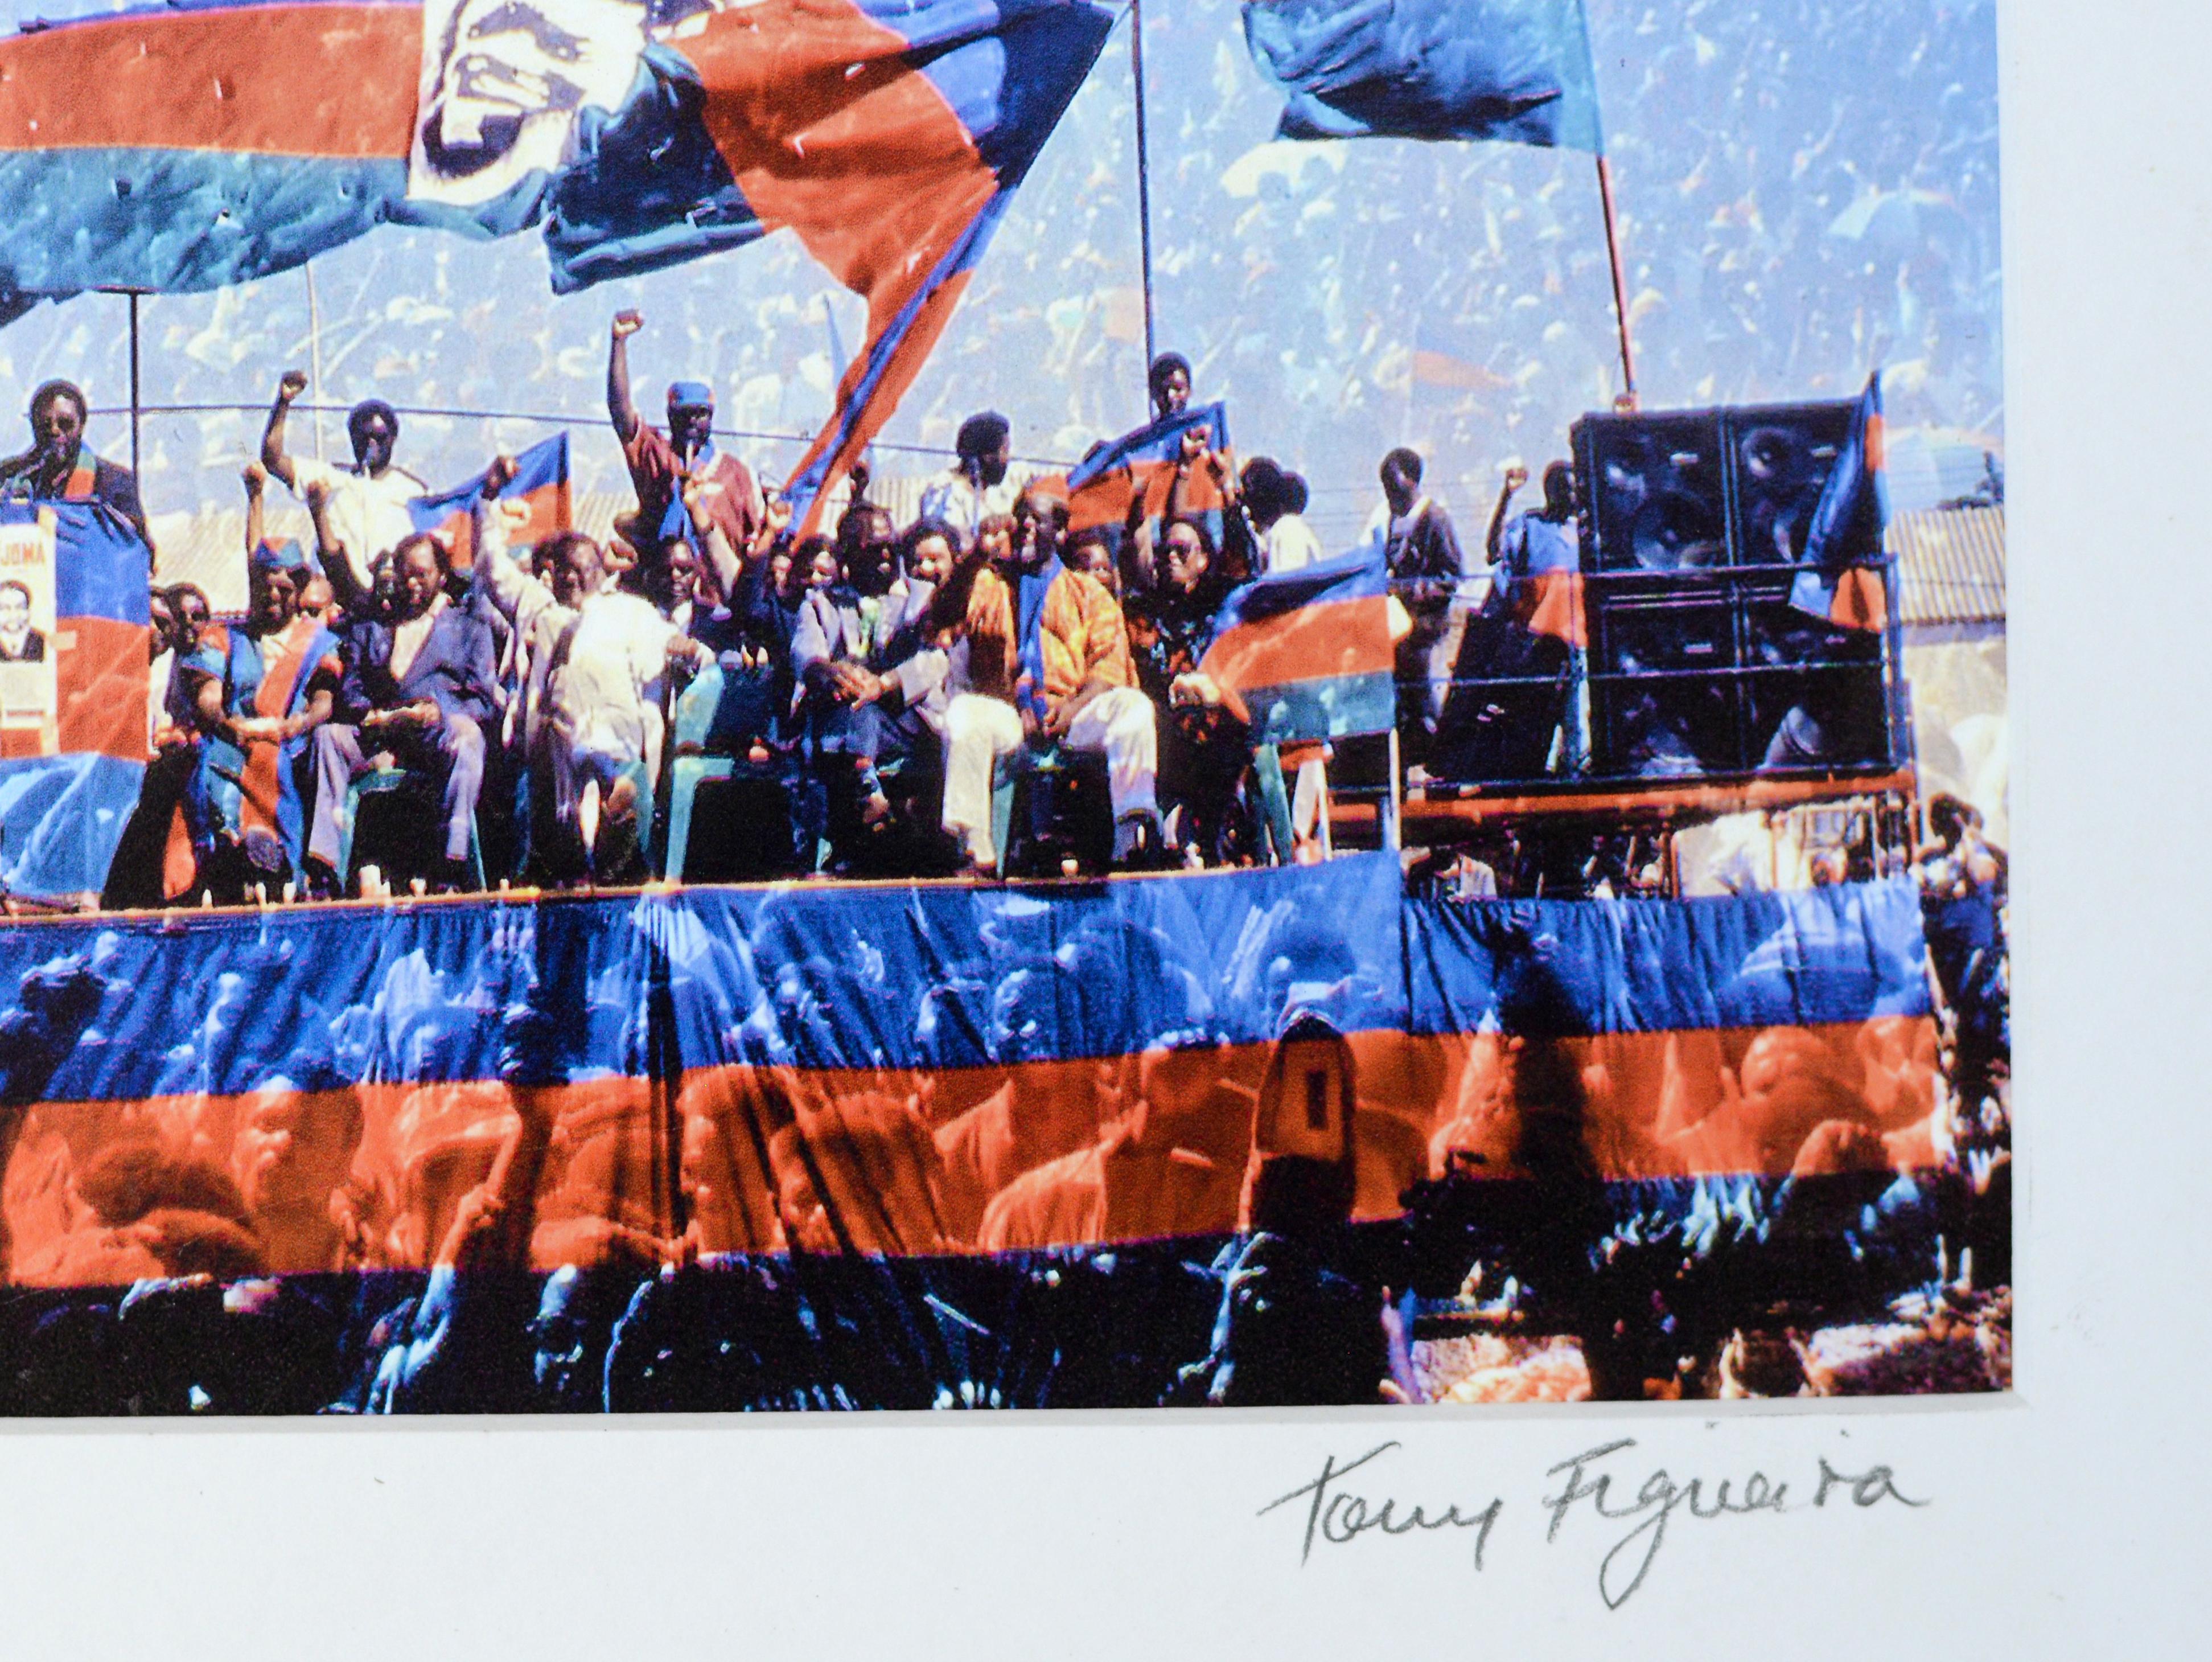 SWAPO Rally (Double Exposure), c. 1989 (printed c. 2014). Inkjet Print on Hahnemuhle Fine Art Baryta Satin Paper, 1/1

Tony Figueira (1959 – 2017)Tony Figueira was born in 1959 in Huambo, Angola. At the age of seven his family moved to Windhoek,